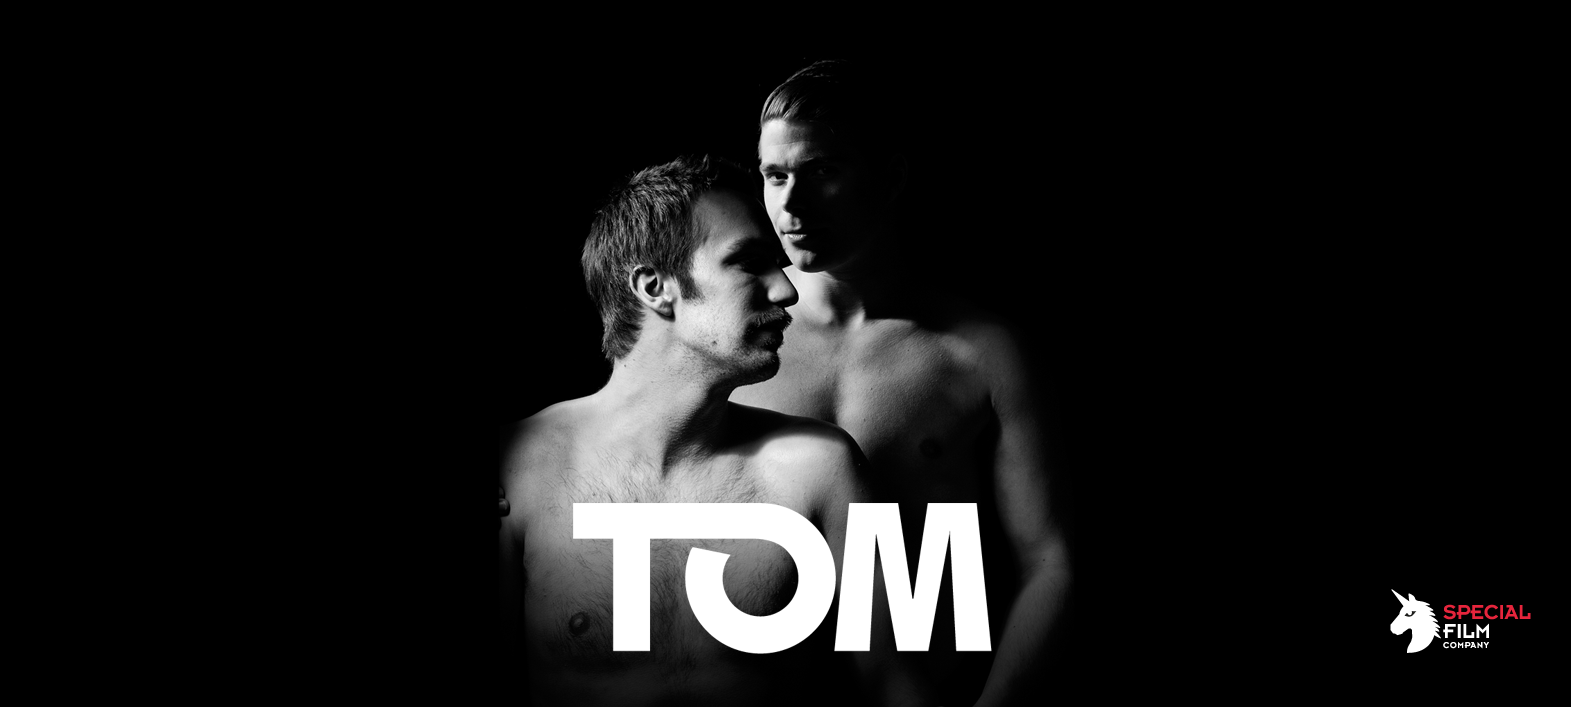 New Tom Of Finland Movie Trailer Looks Great… Though We Ll Have To